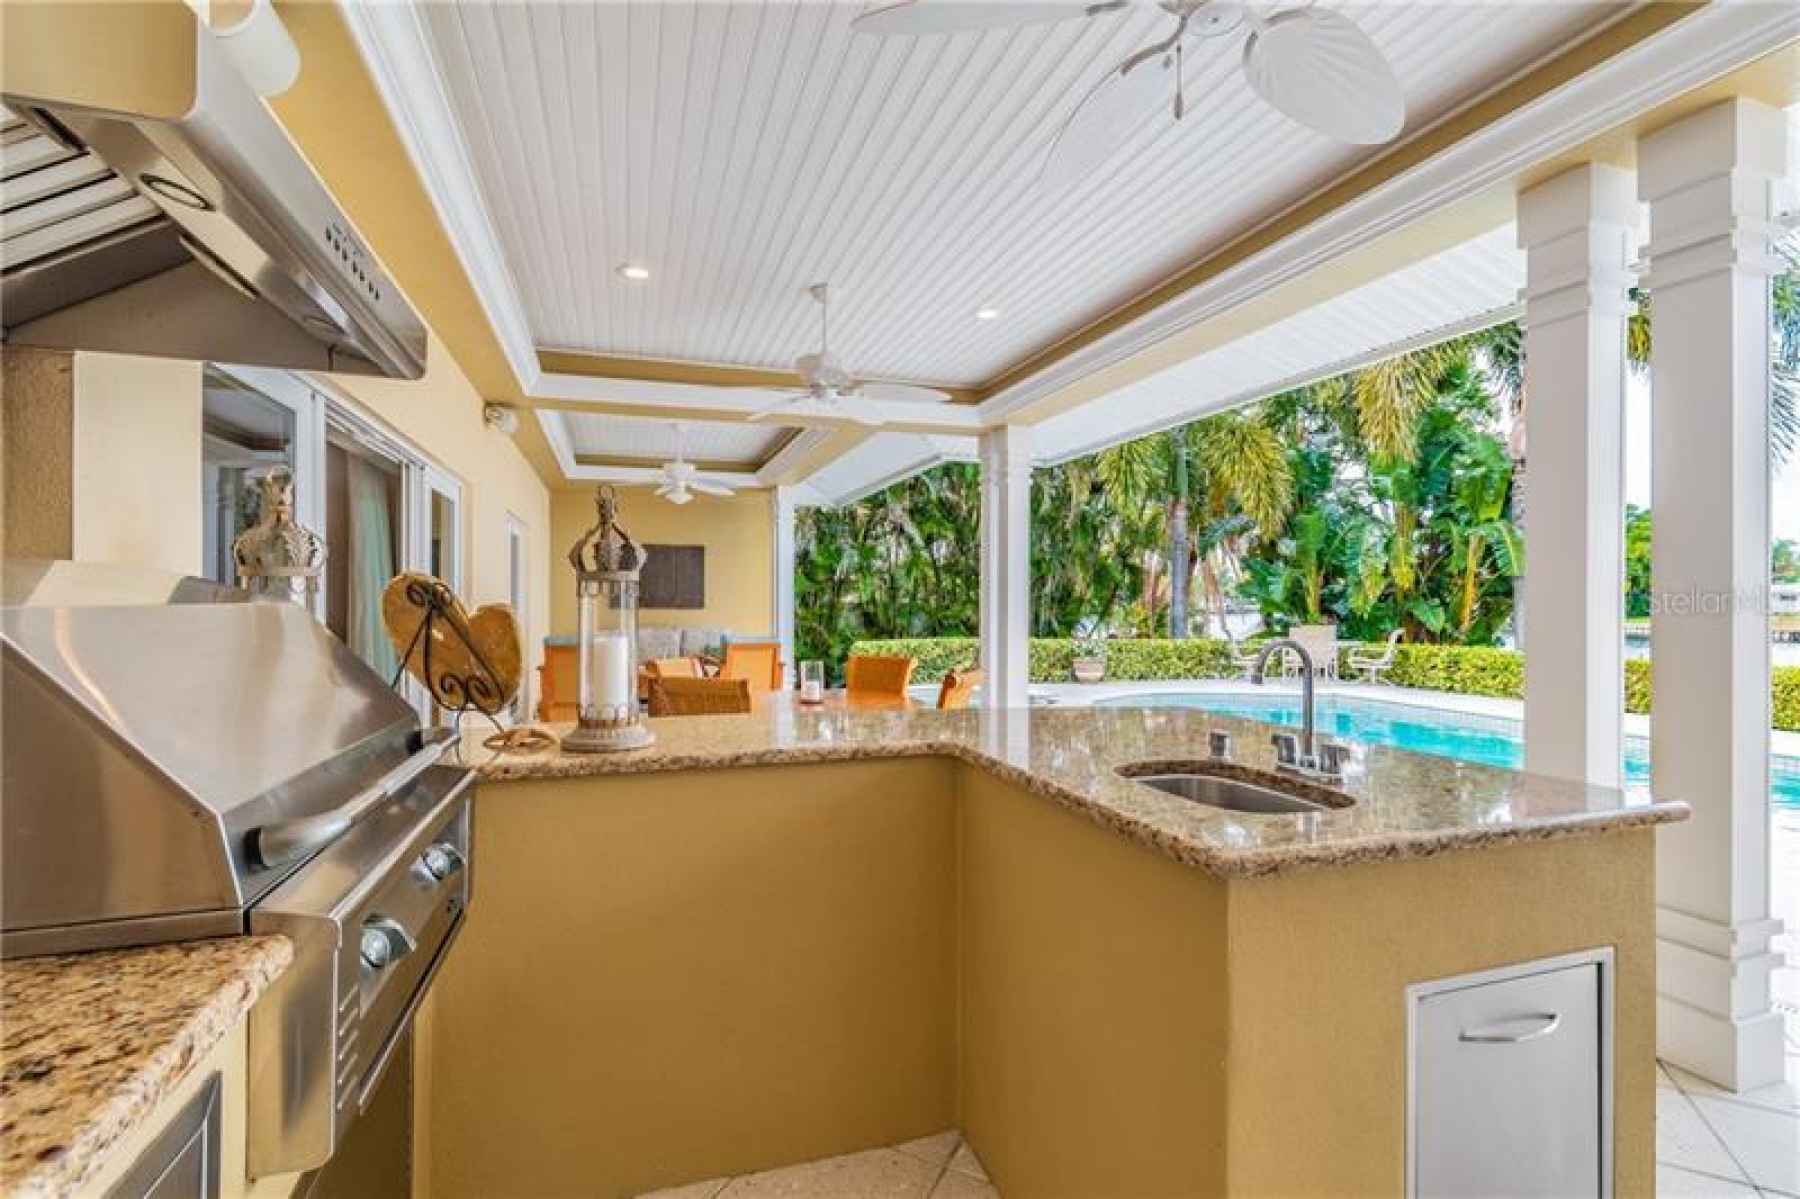 Wide covered Lanai with outdoor kitchen.